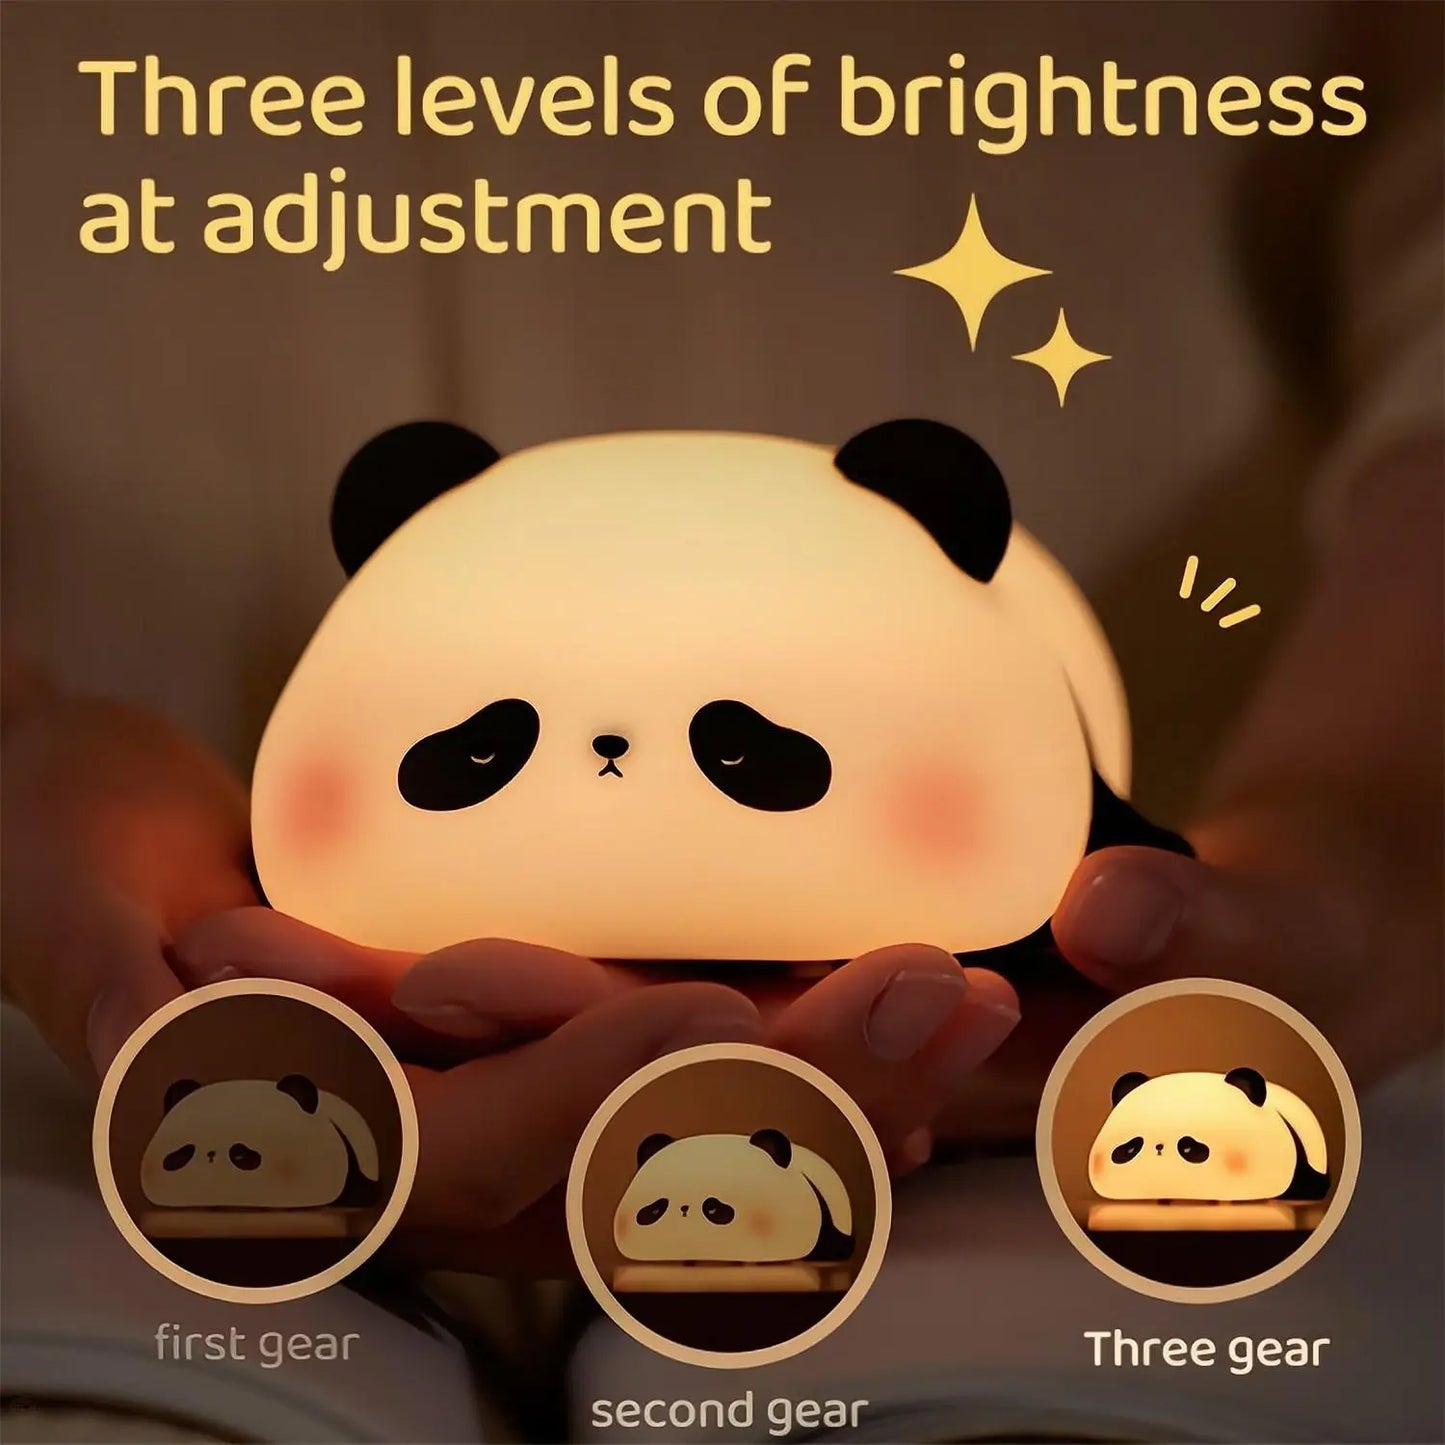 LED Night Lights Cute Sheep, Panda, Rabbit Silicone Lamp, USB Rechargeable Timing Bedside Decor Kids Baby nightlight